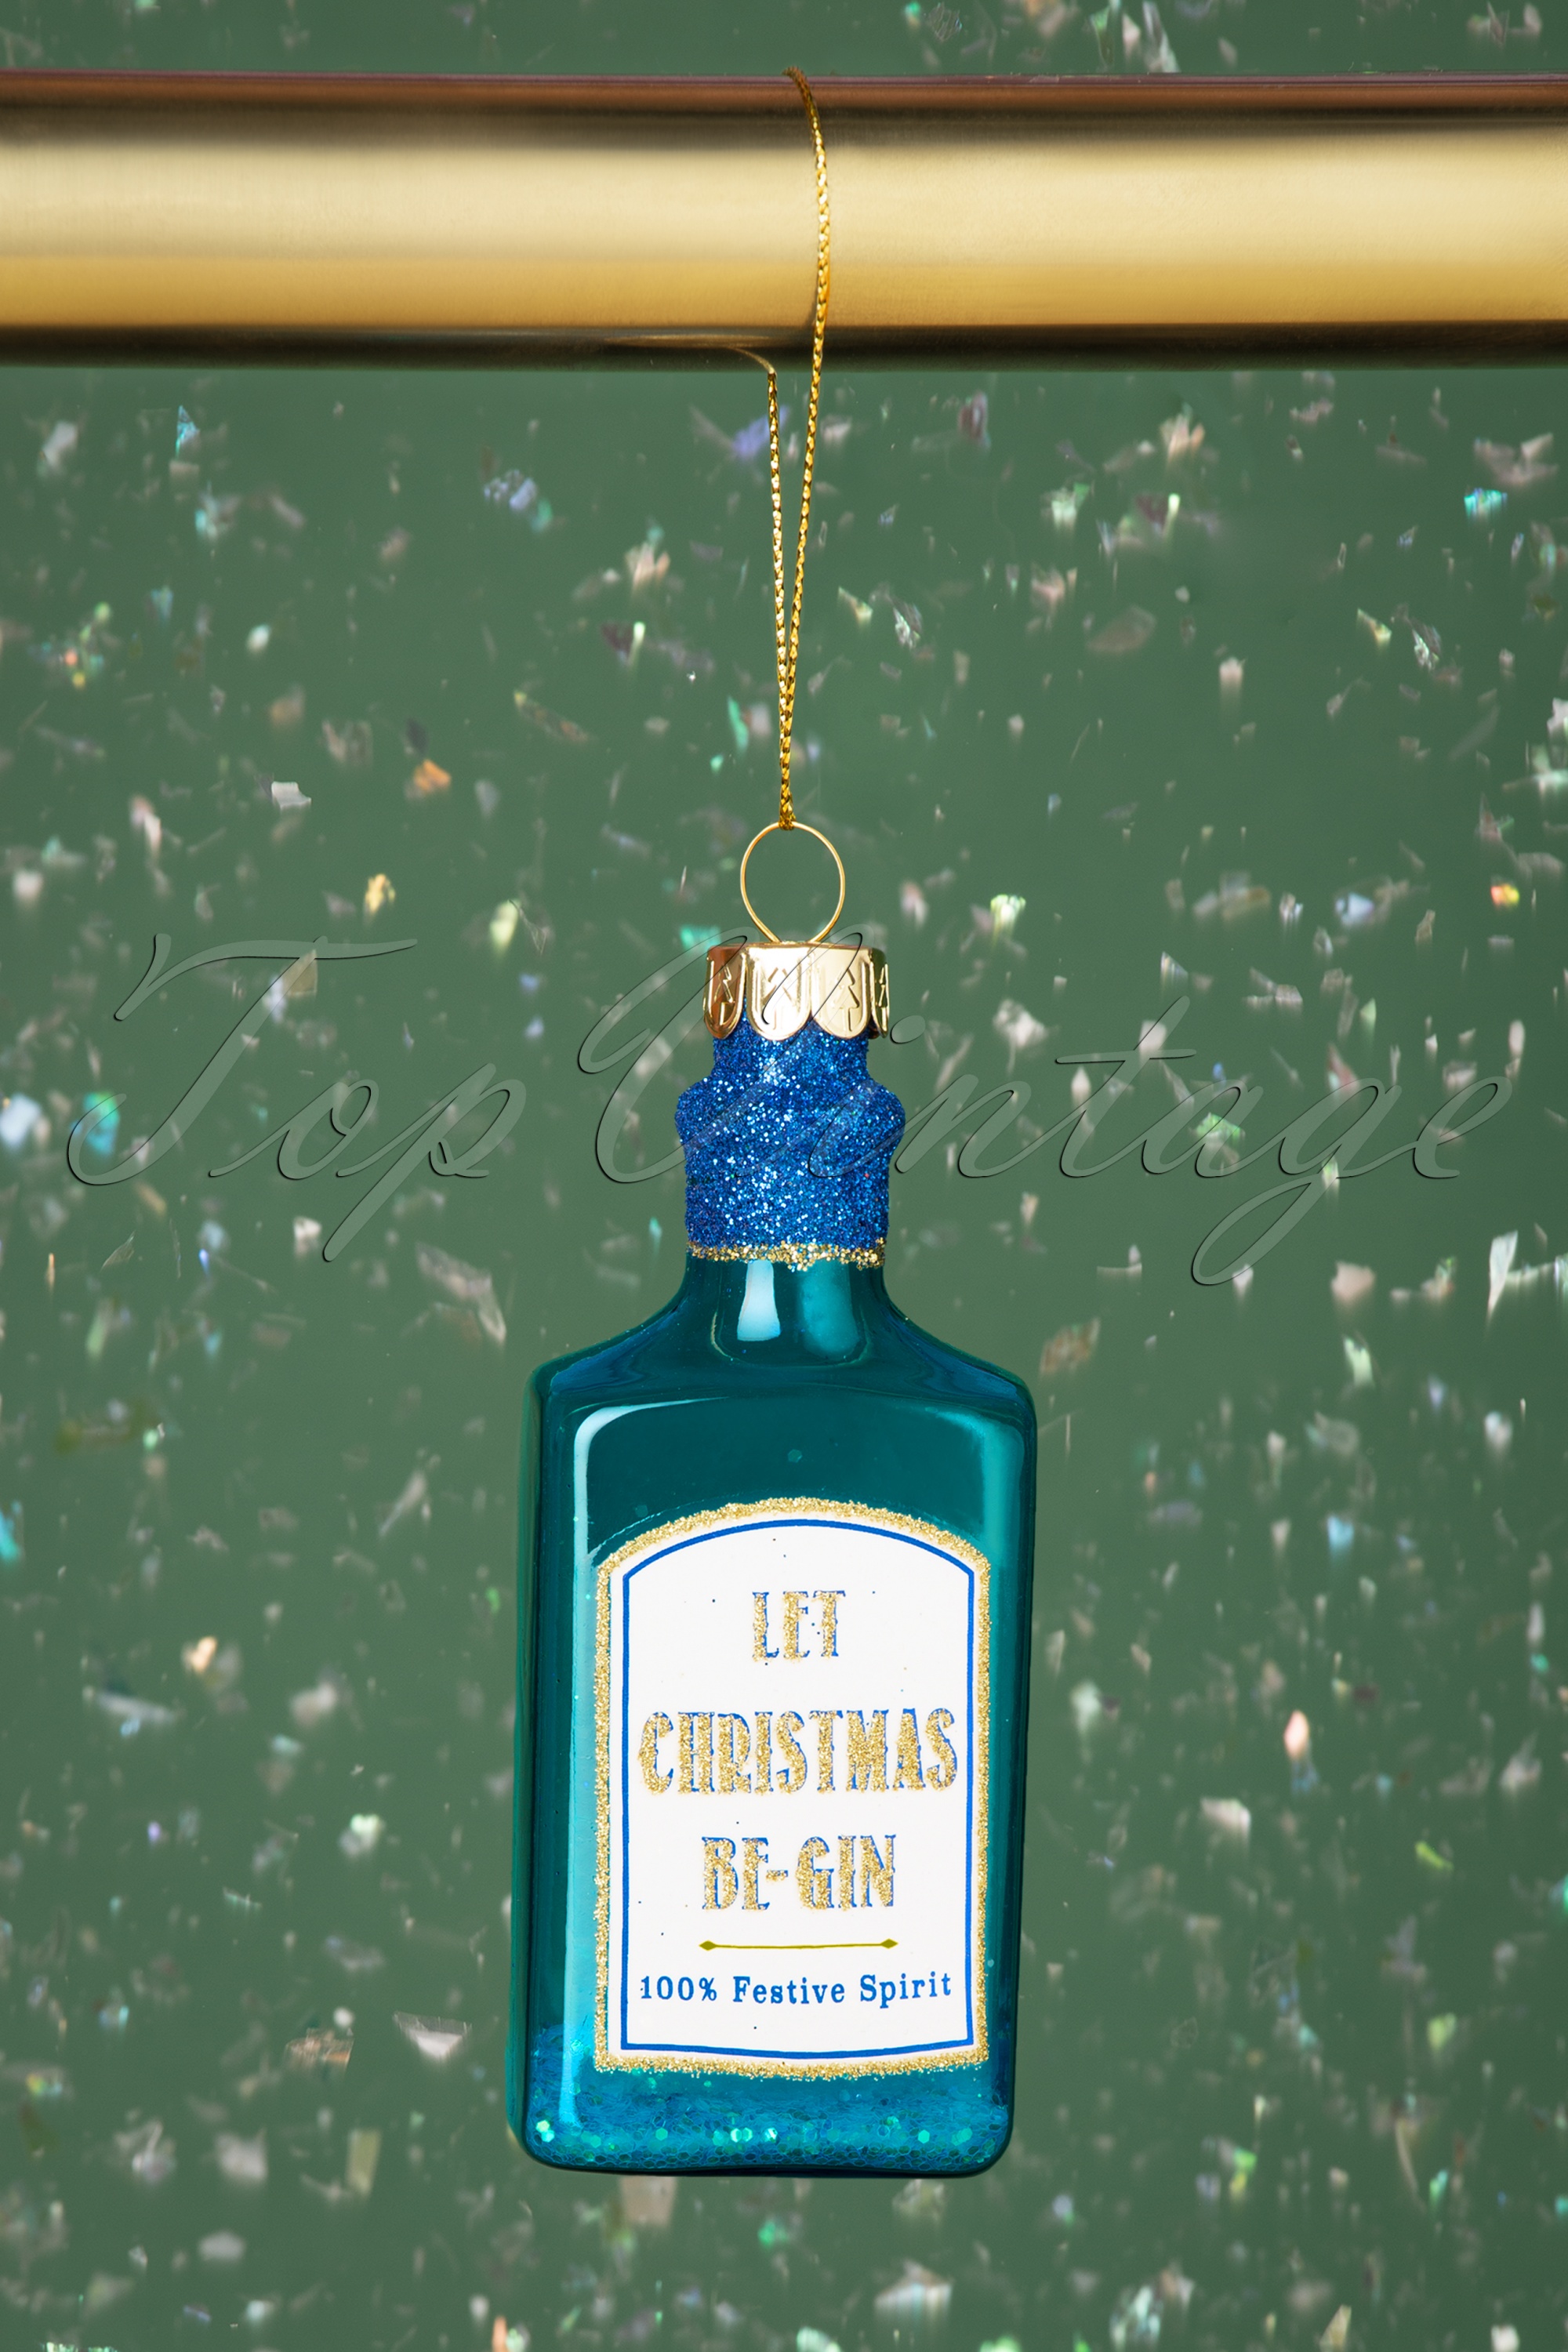 Sass & Belle - Let Christmas Be Gin kerstbal in blauw